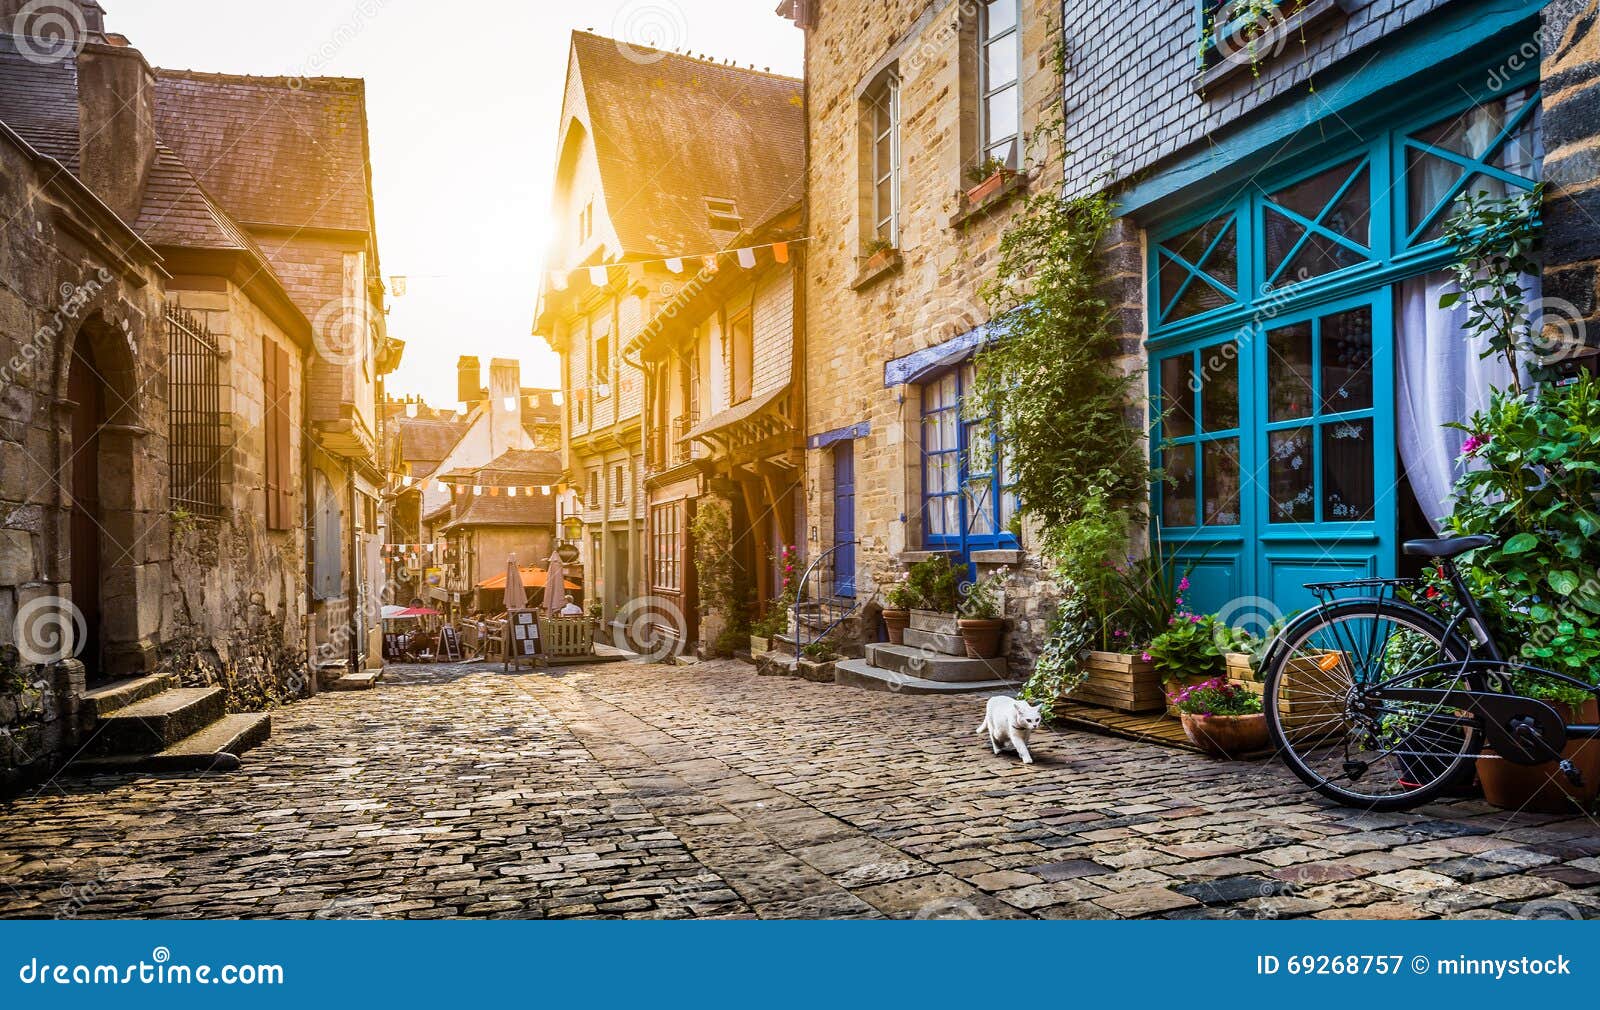 historic town in bretagne, france at sunset